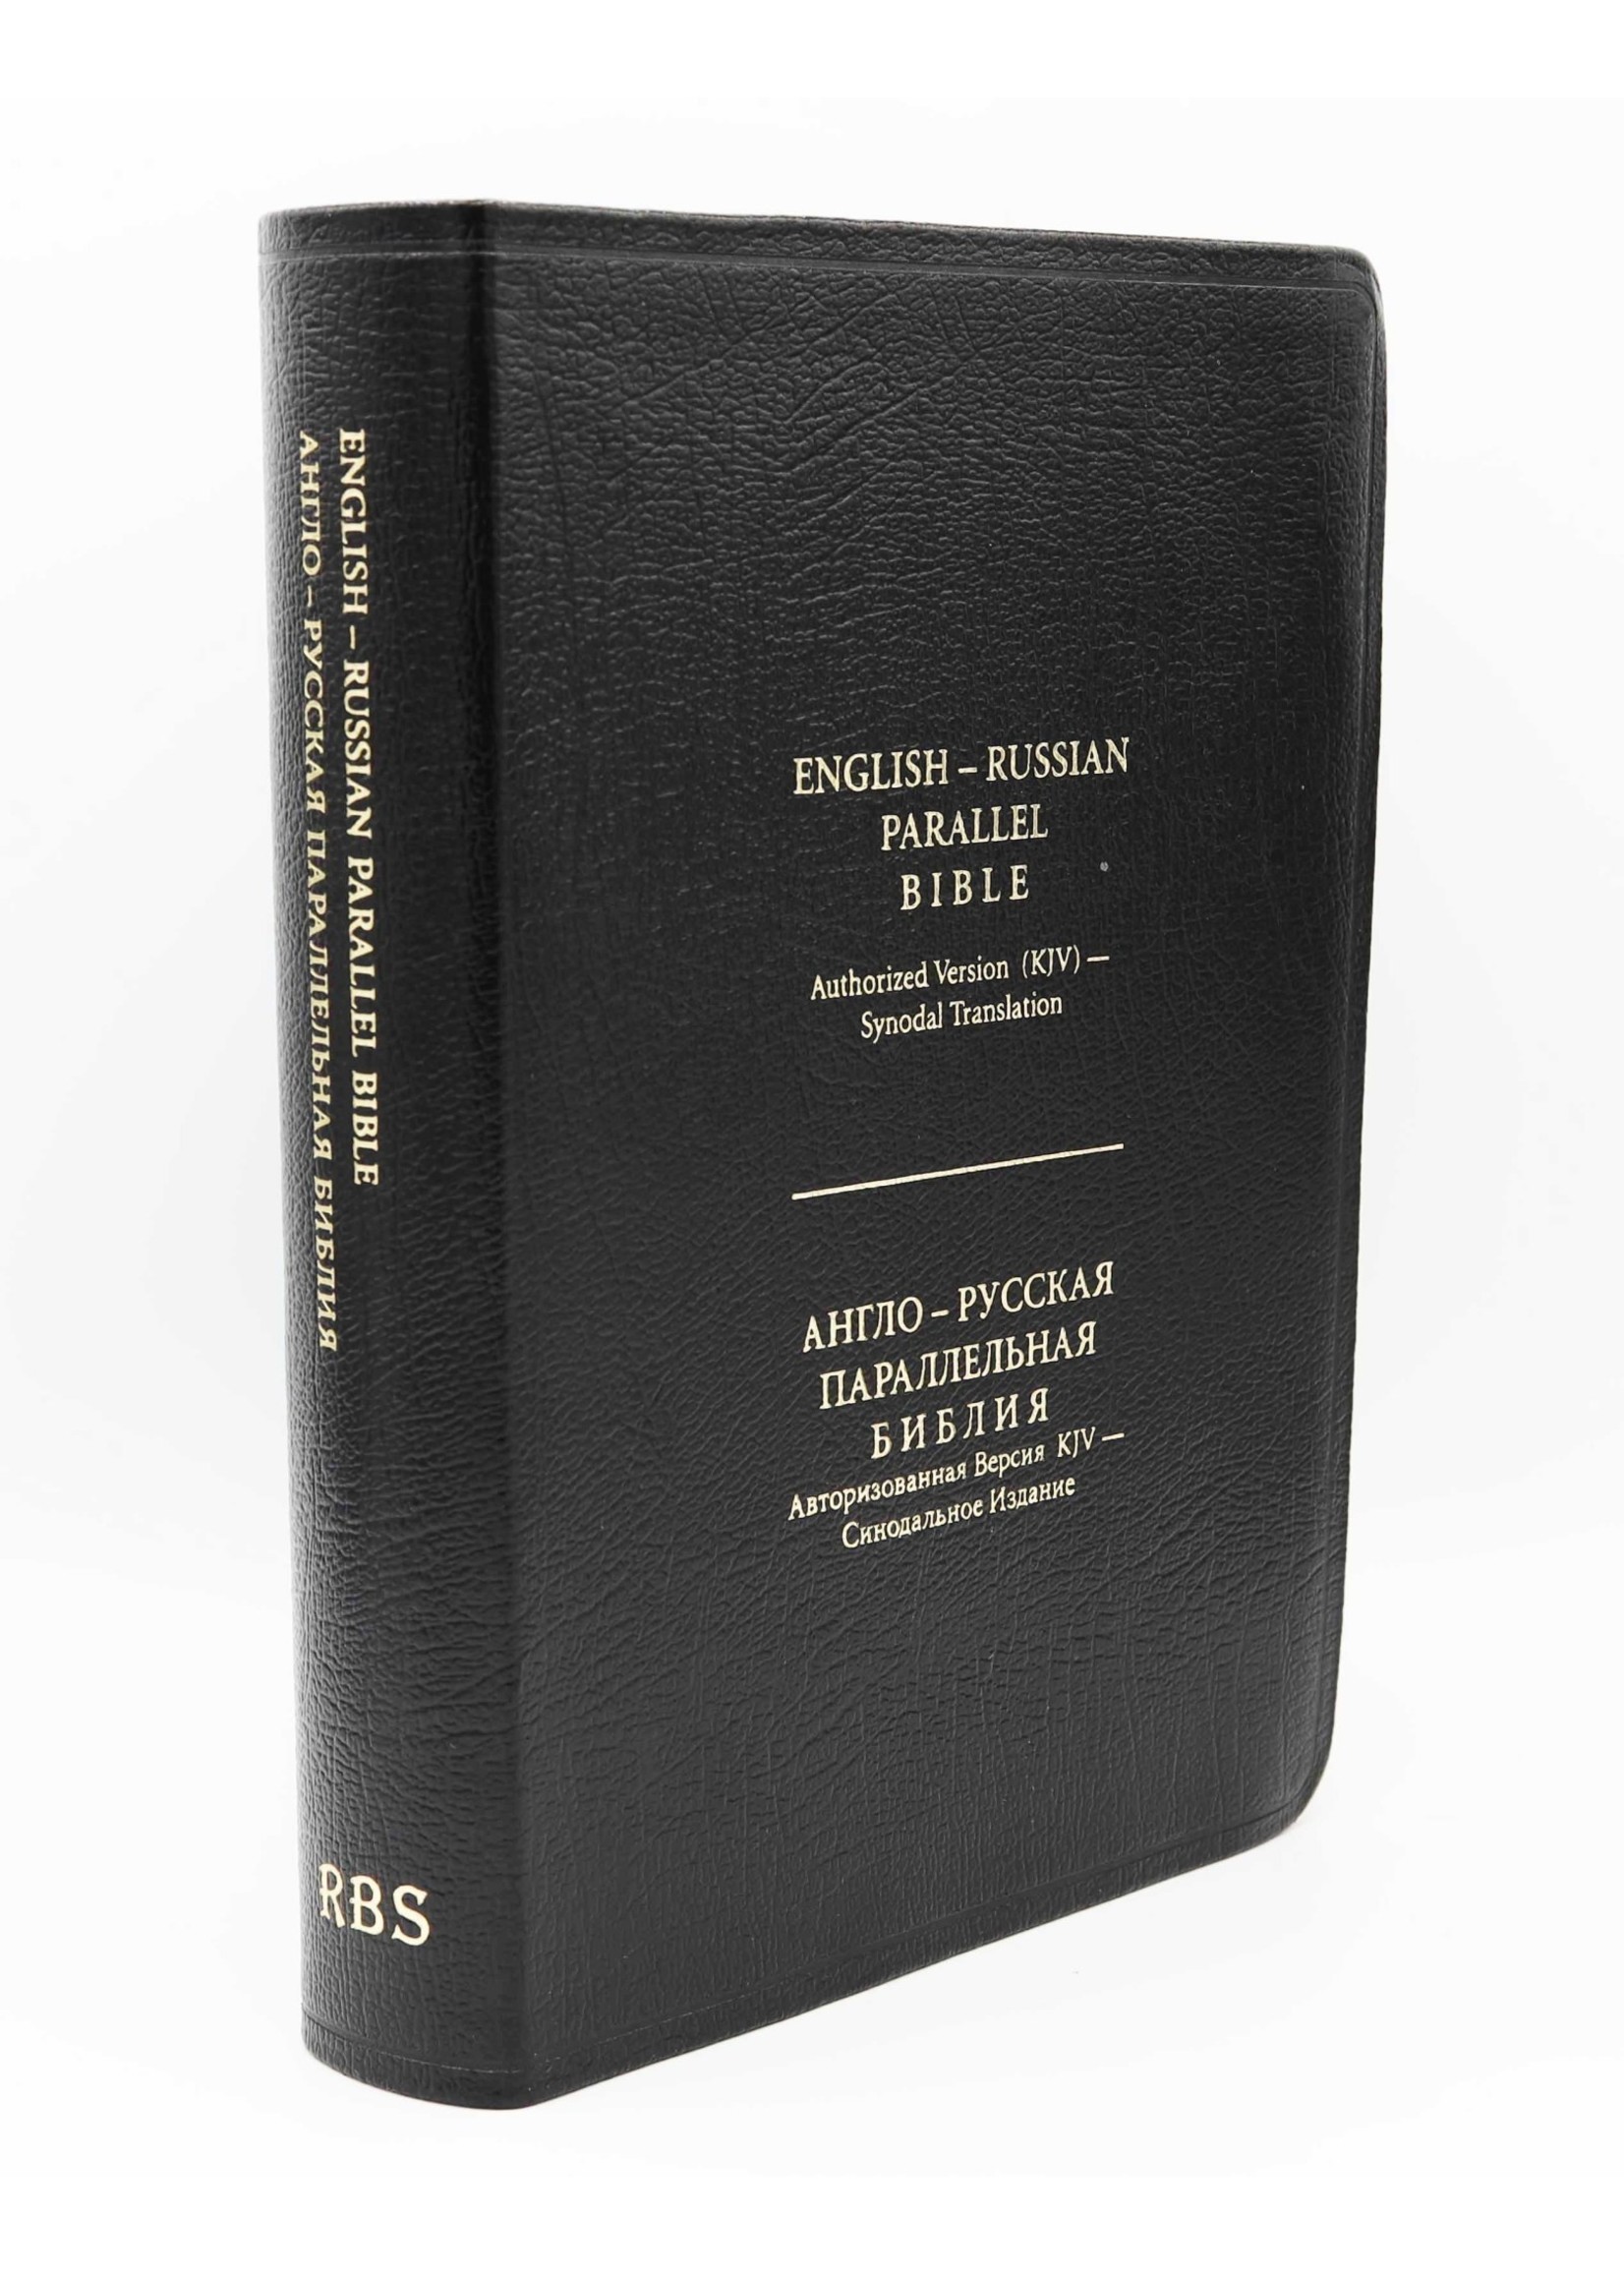 English-Russian Parallel Bible (KJV-SYNO), Index,  Large, Genuine Leather Black